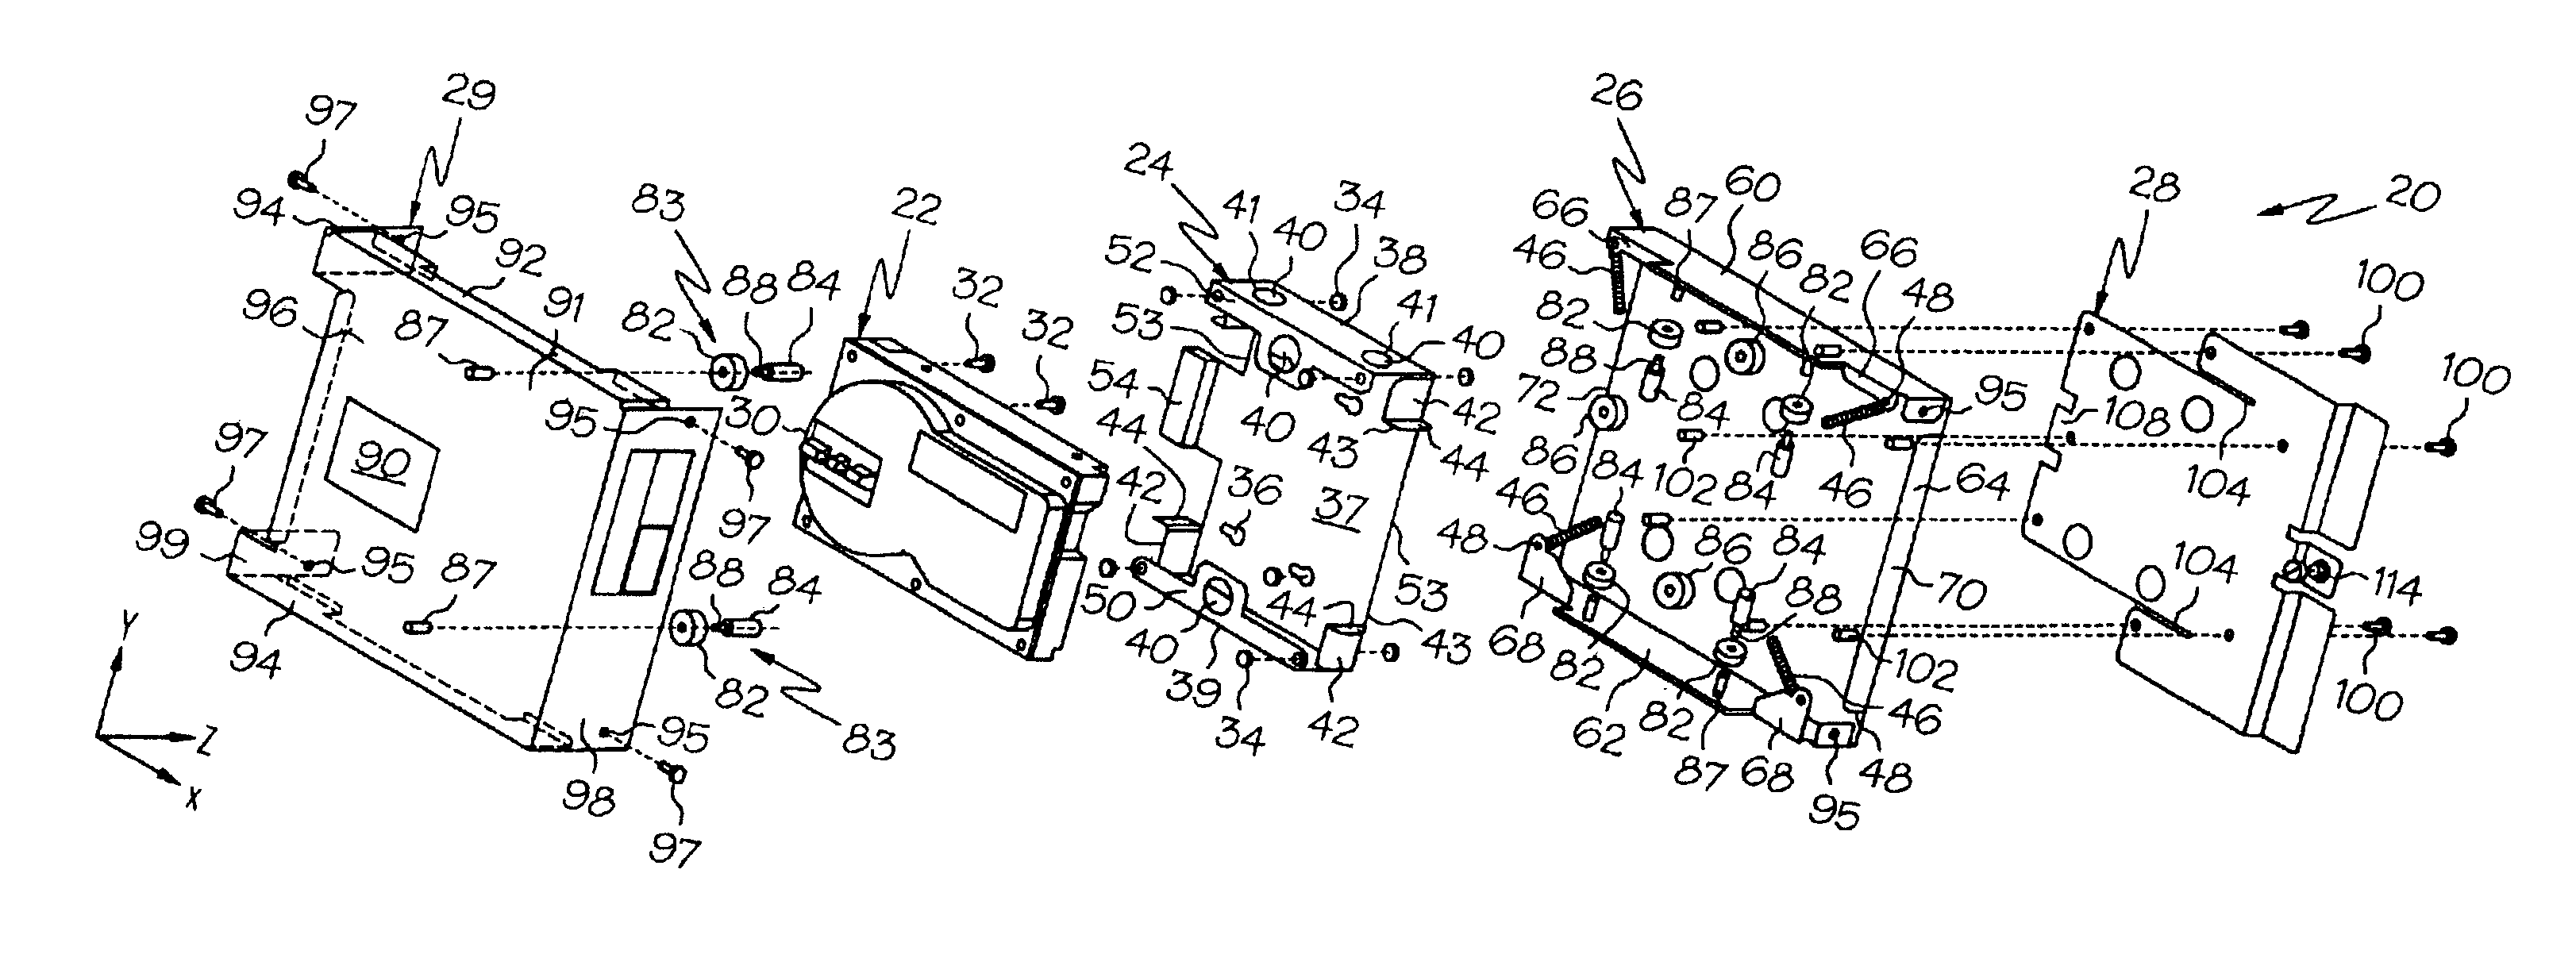 Disk drive mounting system for absorbing shock and vibration in a machining environment